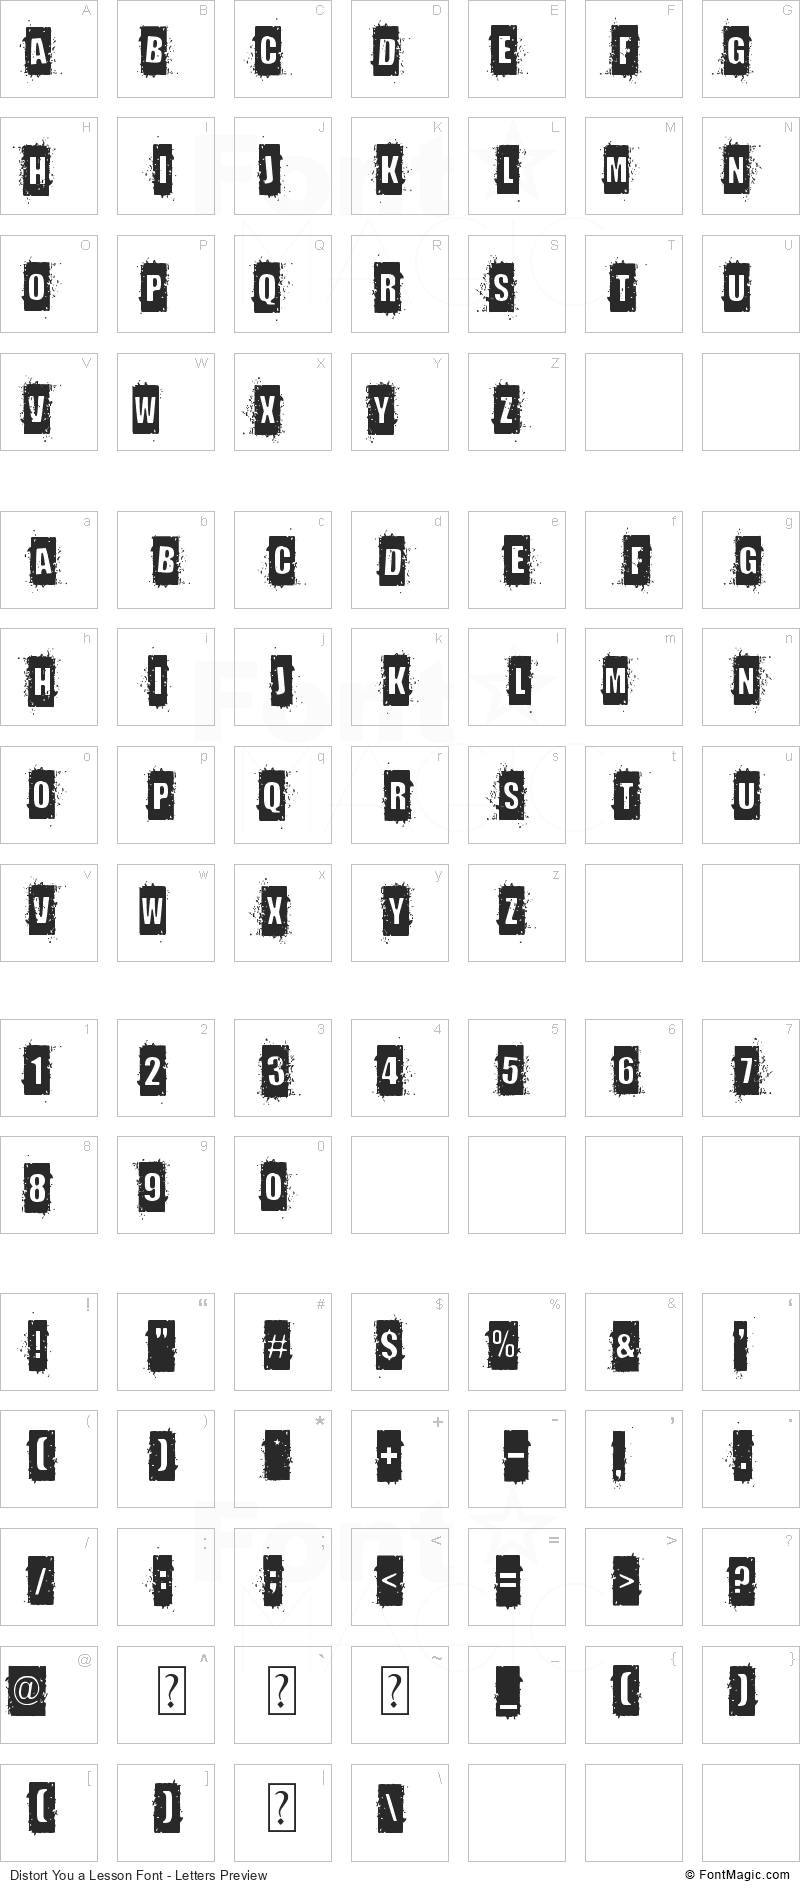 Distort You a Lesson Font - All Latters Preview Chart